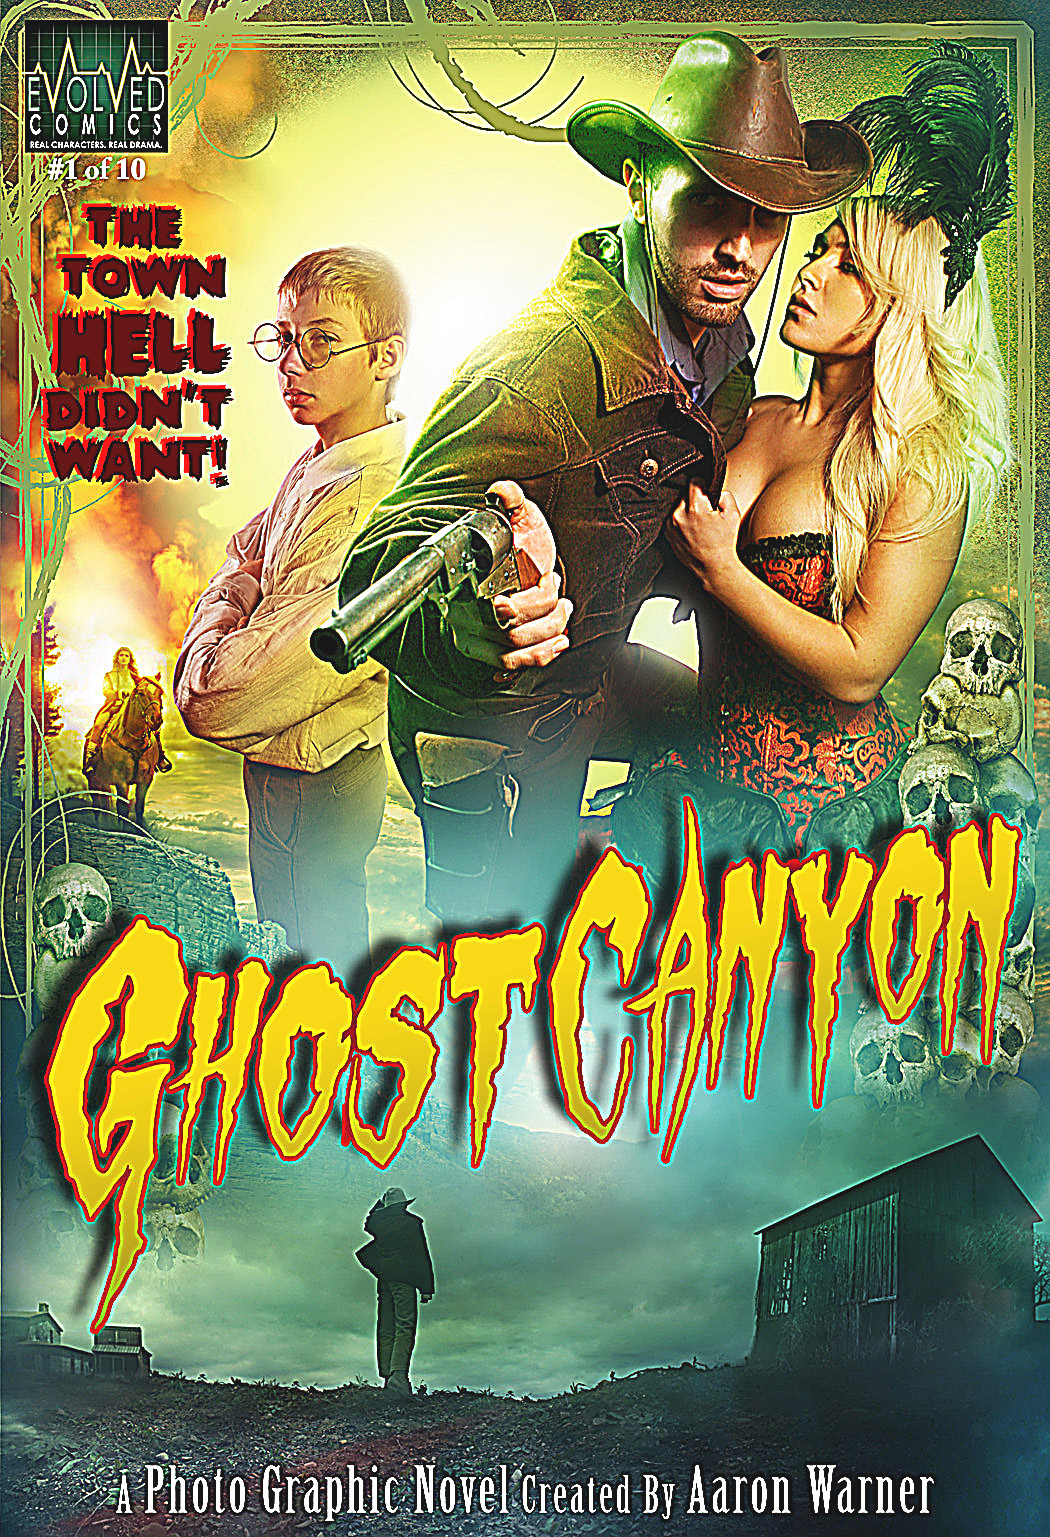 Lone Ranger Festival to creator of ‘Ghost Canyon’ series